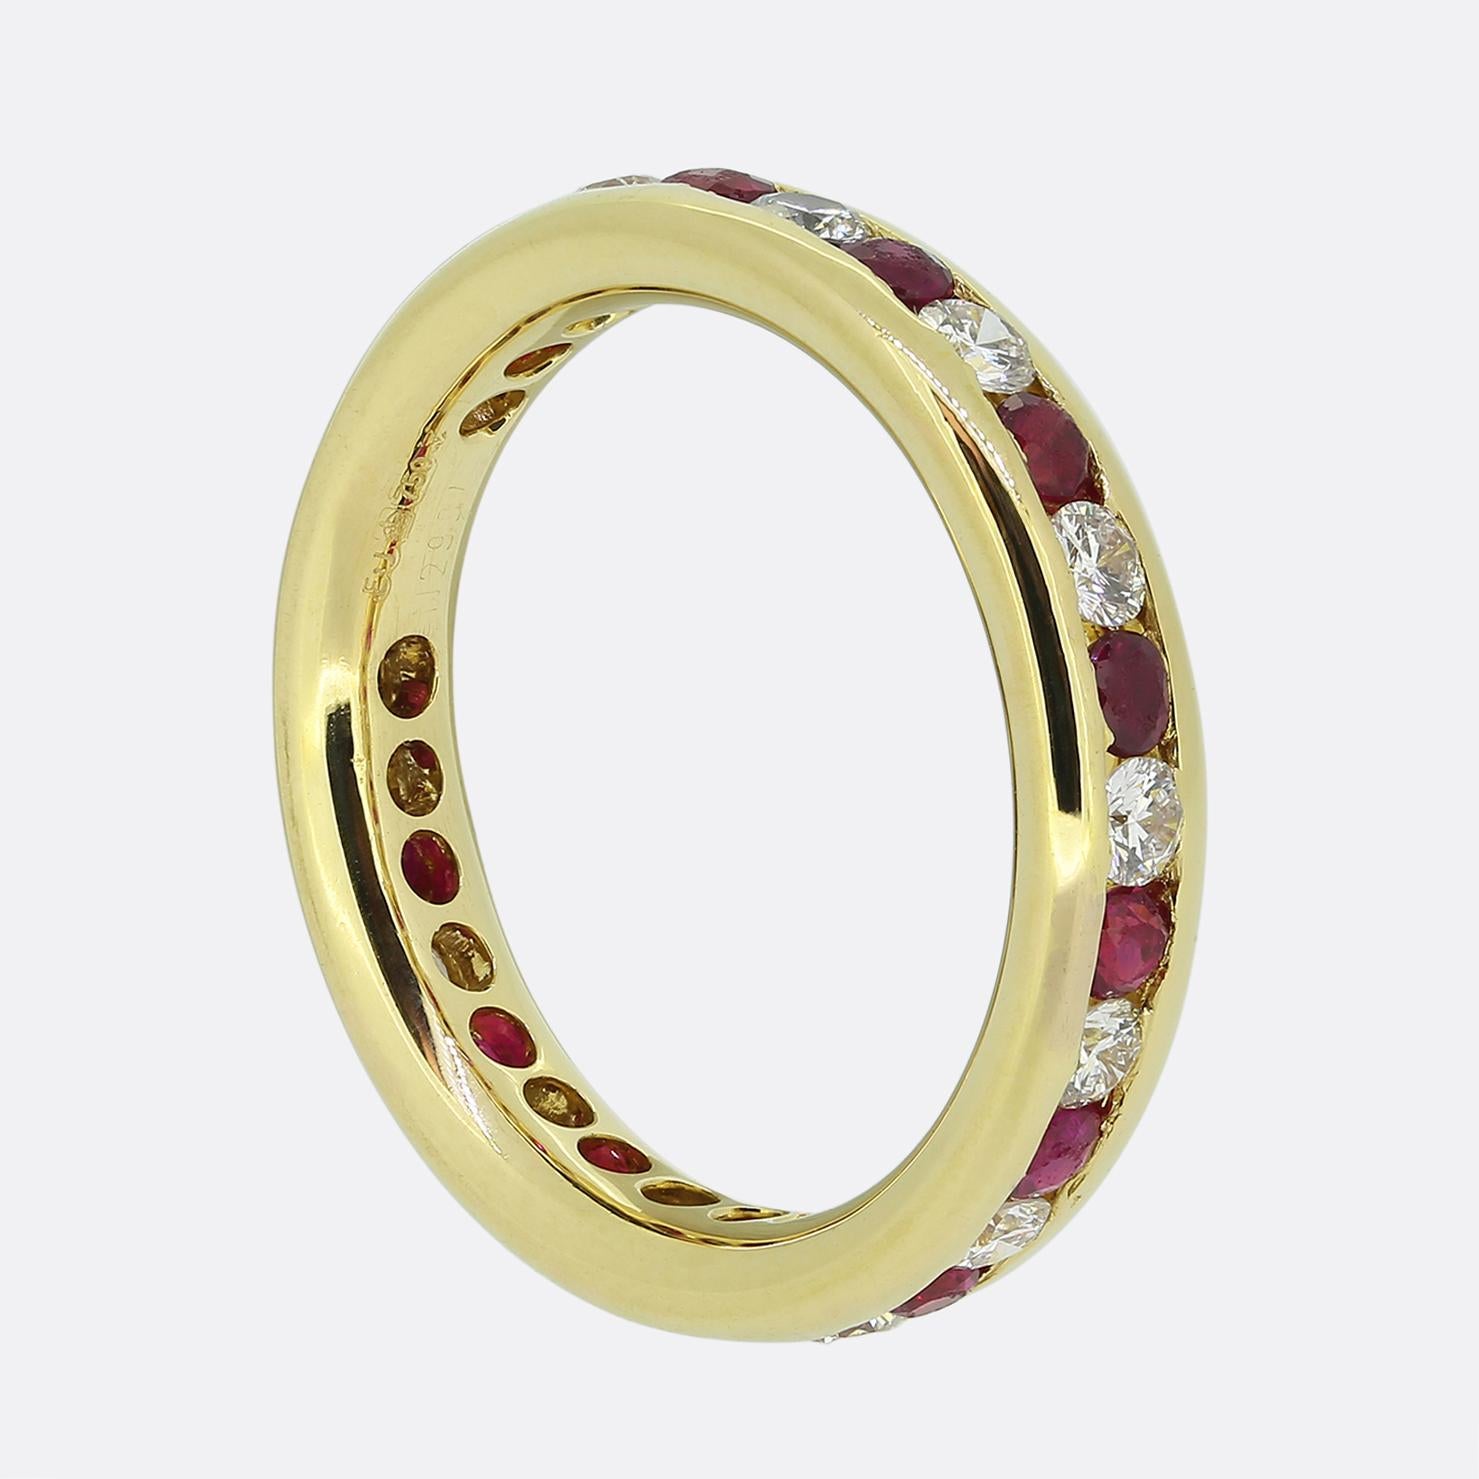 Here we have an lovely ruby and diamond eternity ring. This vintage piece has been crafted from 18ct yellow gold and showcases an alternating array of rich red rubies and bright white round brilliant cut diamonds; each of which has been expertly